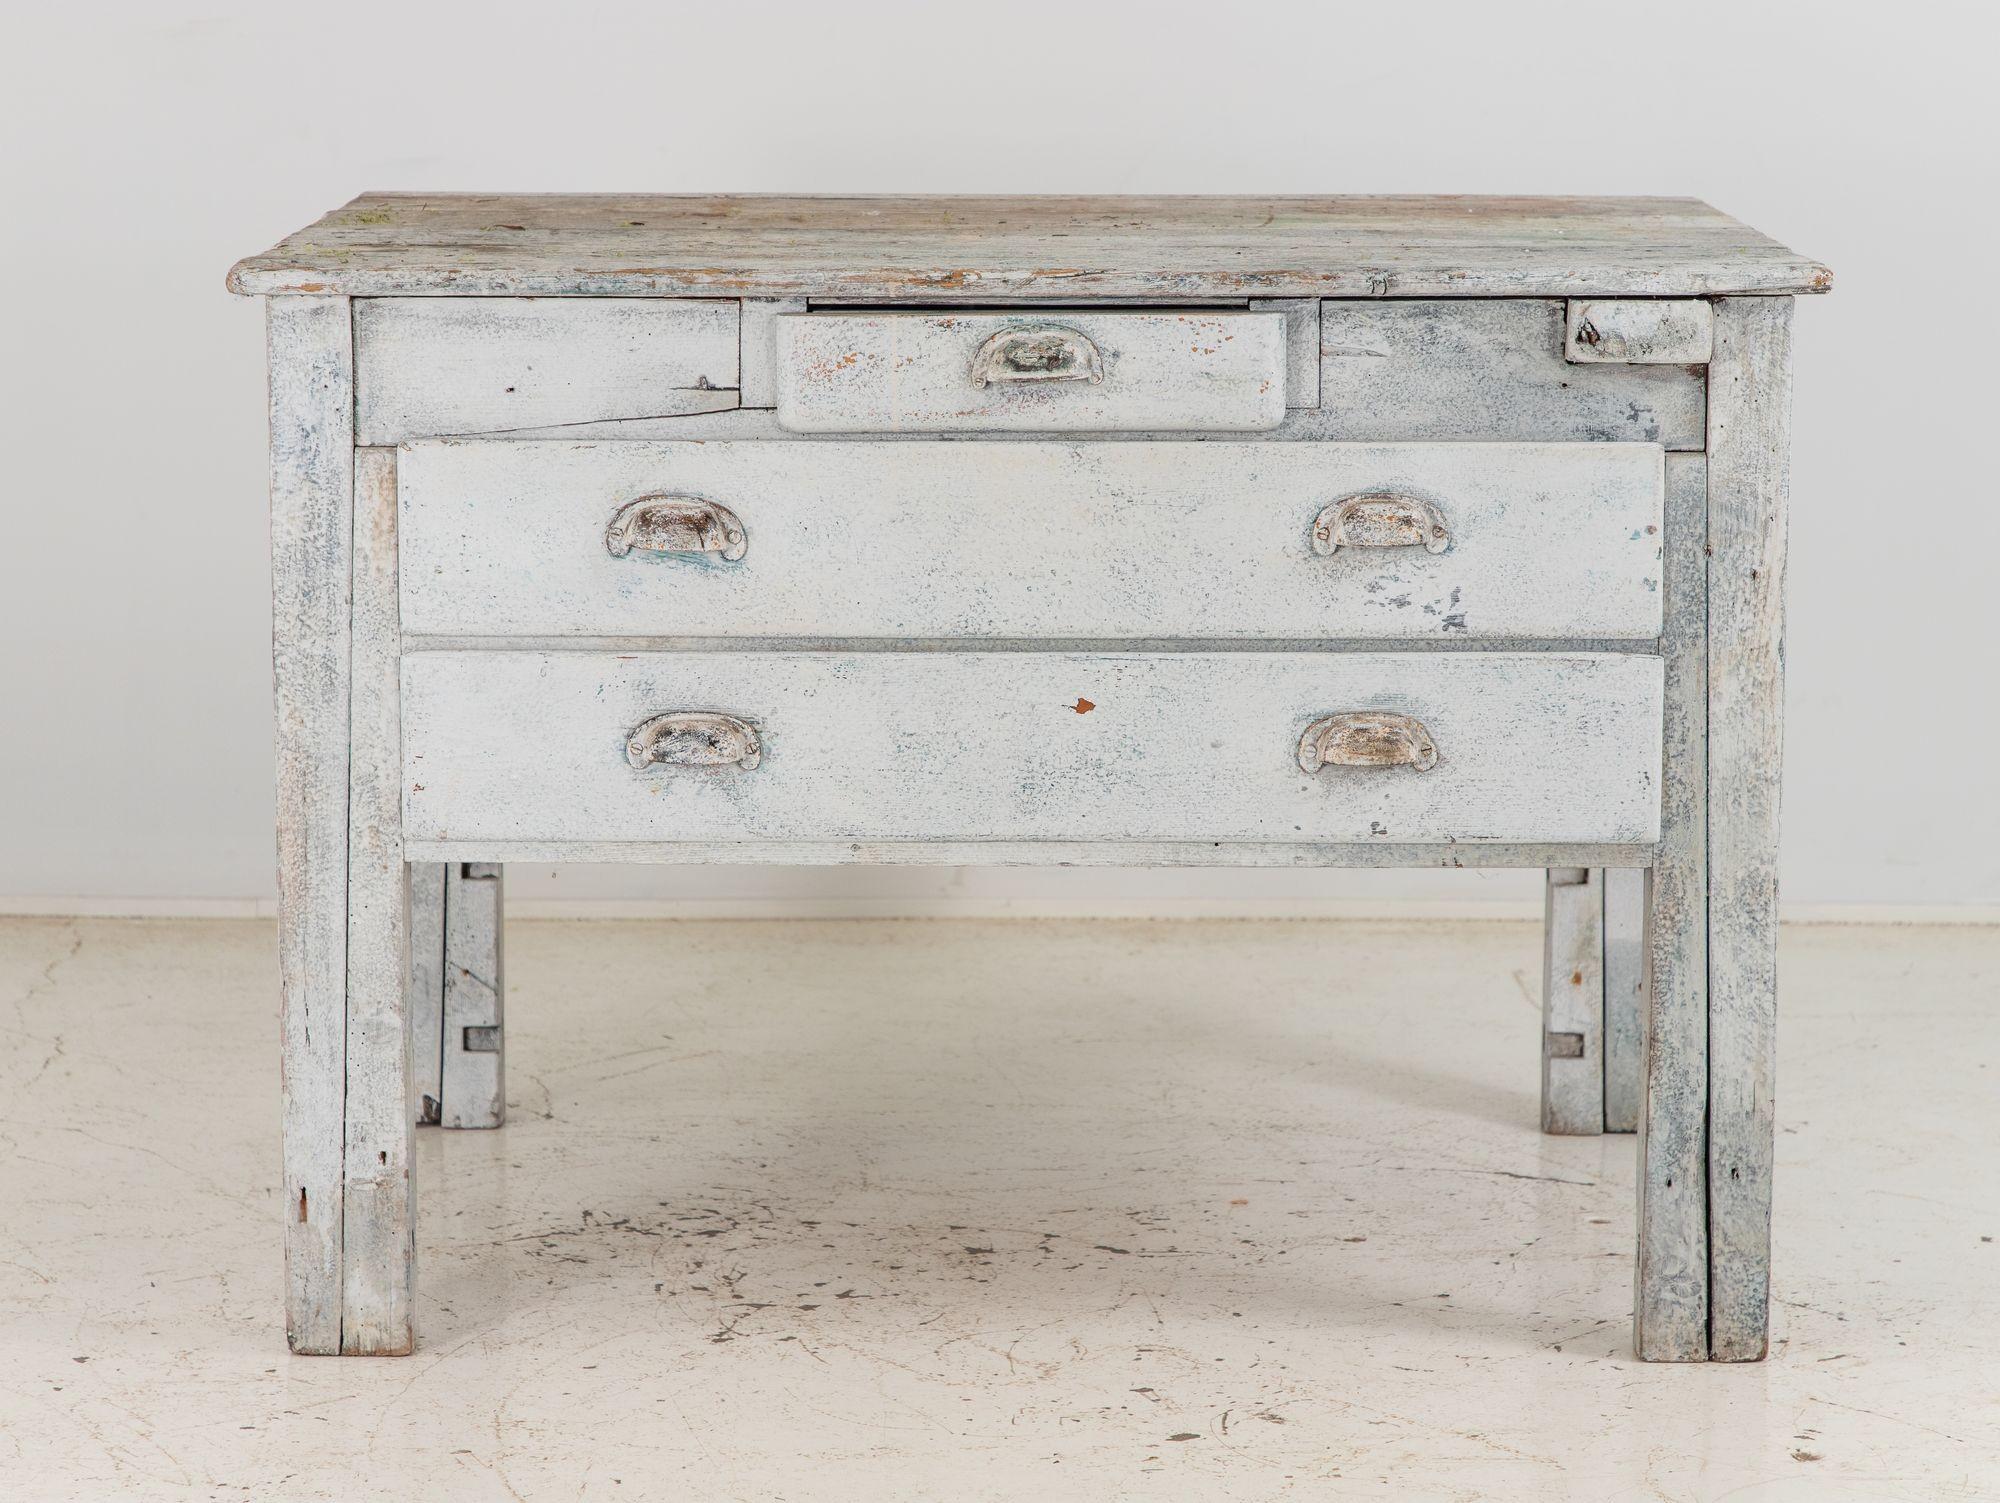 The 19th Century gray painted workbench is a versatile and practical addition to any space. Its sturdy construction ensures durability and reliability. The workbench features three drawers, each equipped with dividers for efficient organization. The